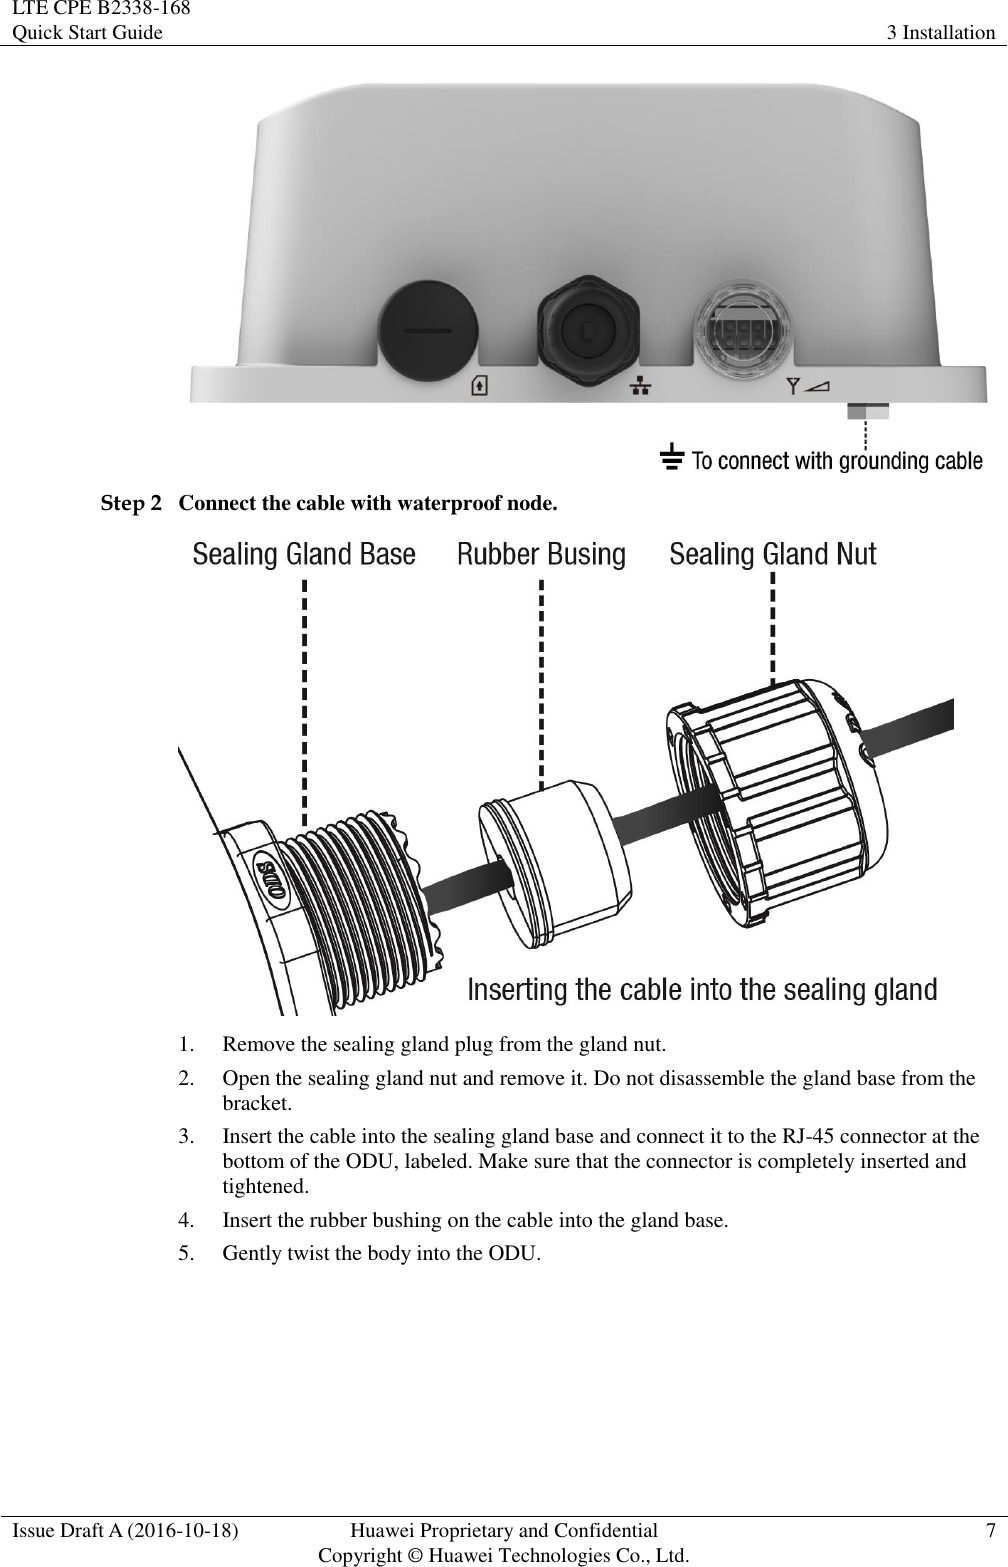 LTE CPE B2338-168   Quick Start Guide 3 Installation  Issue Draft A (2016-10-18) Huawei Proprietary and Confidential                                     Copyright ©  Huawei Technologies Co., Ltd. 7   Step 2 Connect the cable with waterproof node.  1. Remove the sealing gland plug from the gland nut. 2. Open the sealing gland nut and remove it. Do not disassemble the gland base from the bracket. 3. Insert the cable into the sealing gland base and connect it to the RJ-45 connector at the bottom of the ODU, labeled. Make sure that the connector is completely inserted and tightened. 4. Insert the rubber bushing on the cable into the gland base. 5. Gently twist the body into the ODU. 